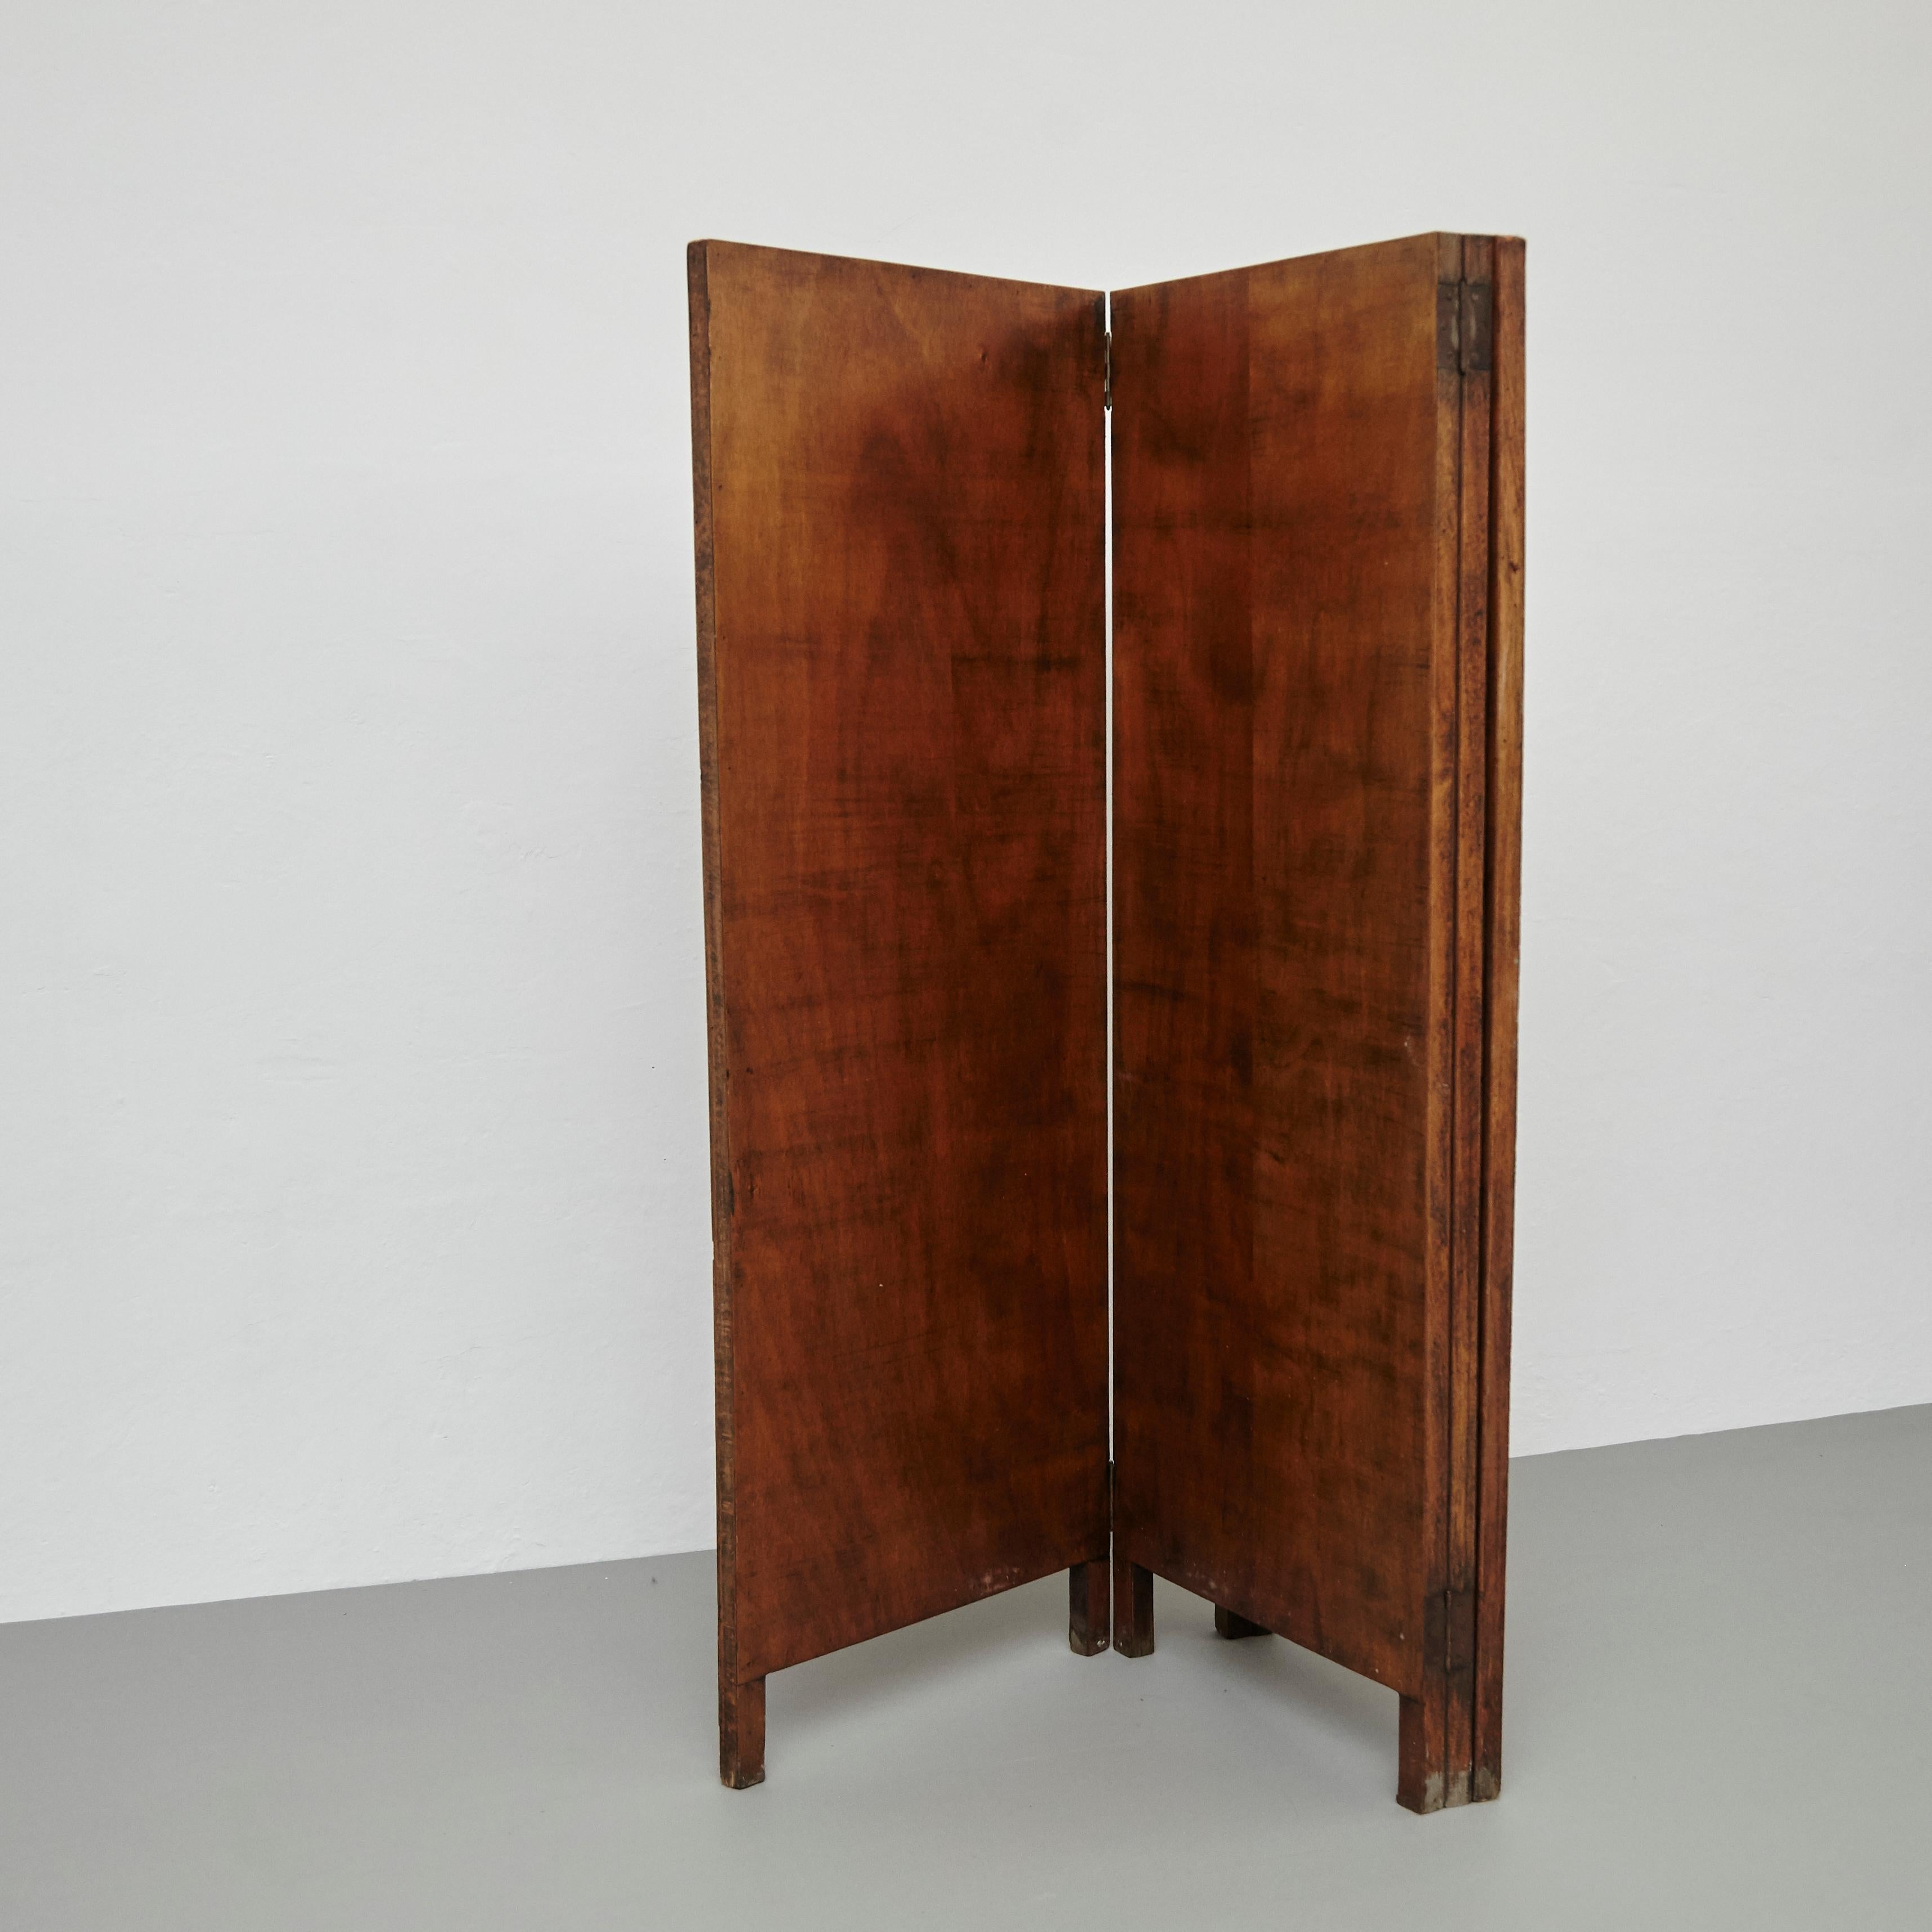 Rustic wood room divider, circa 1930
By unknown artisan, France.

In original condition, with minor wear consistent with age and use, preserving a beautiful patina.

Materials:
Wood

Dimensions:
D 3 cm x W 58 cm (each panel) x H 160 cm
D 3